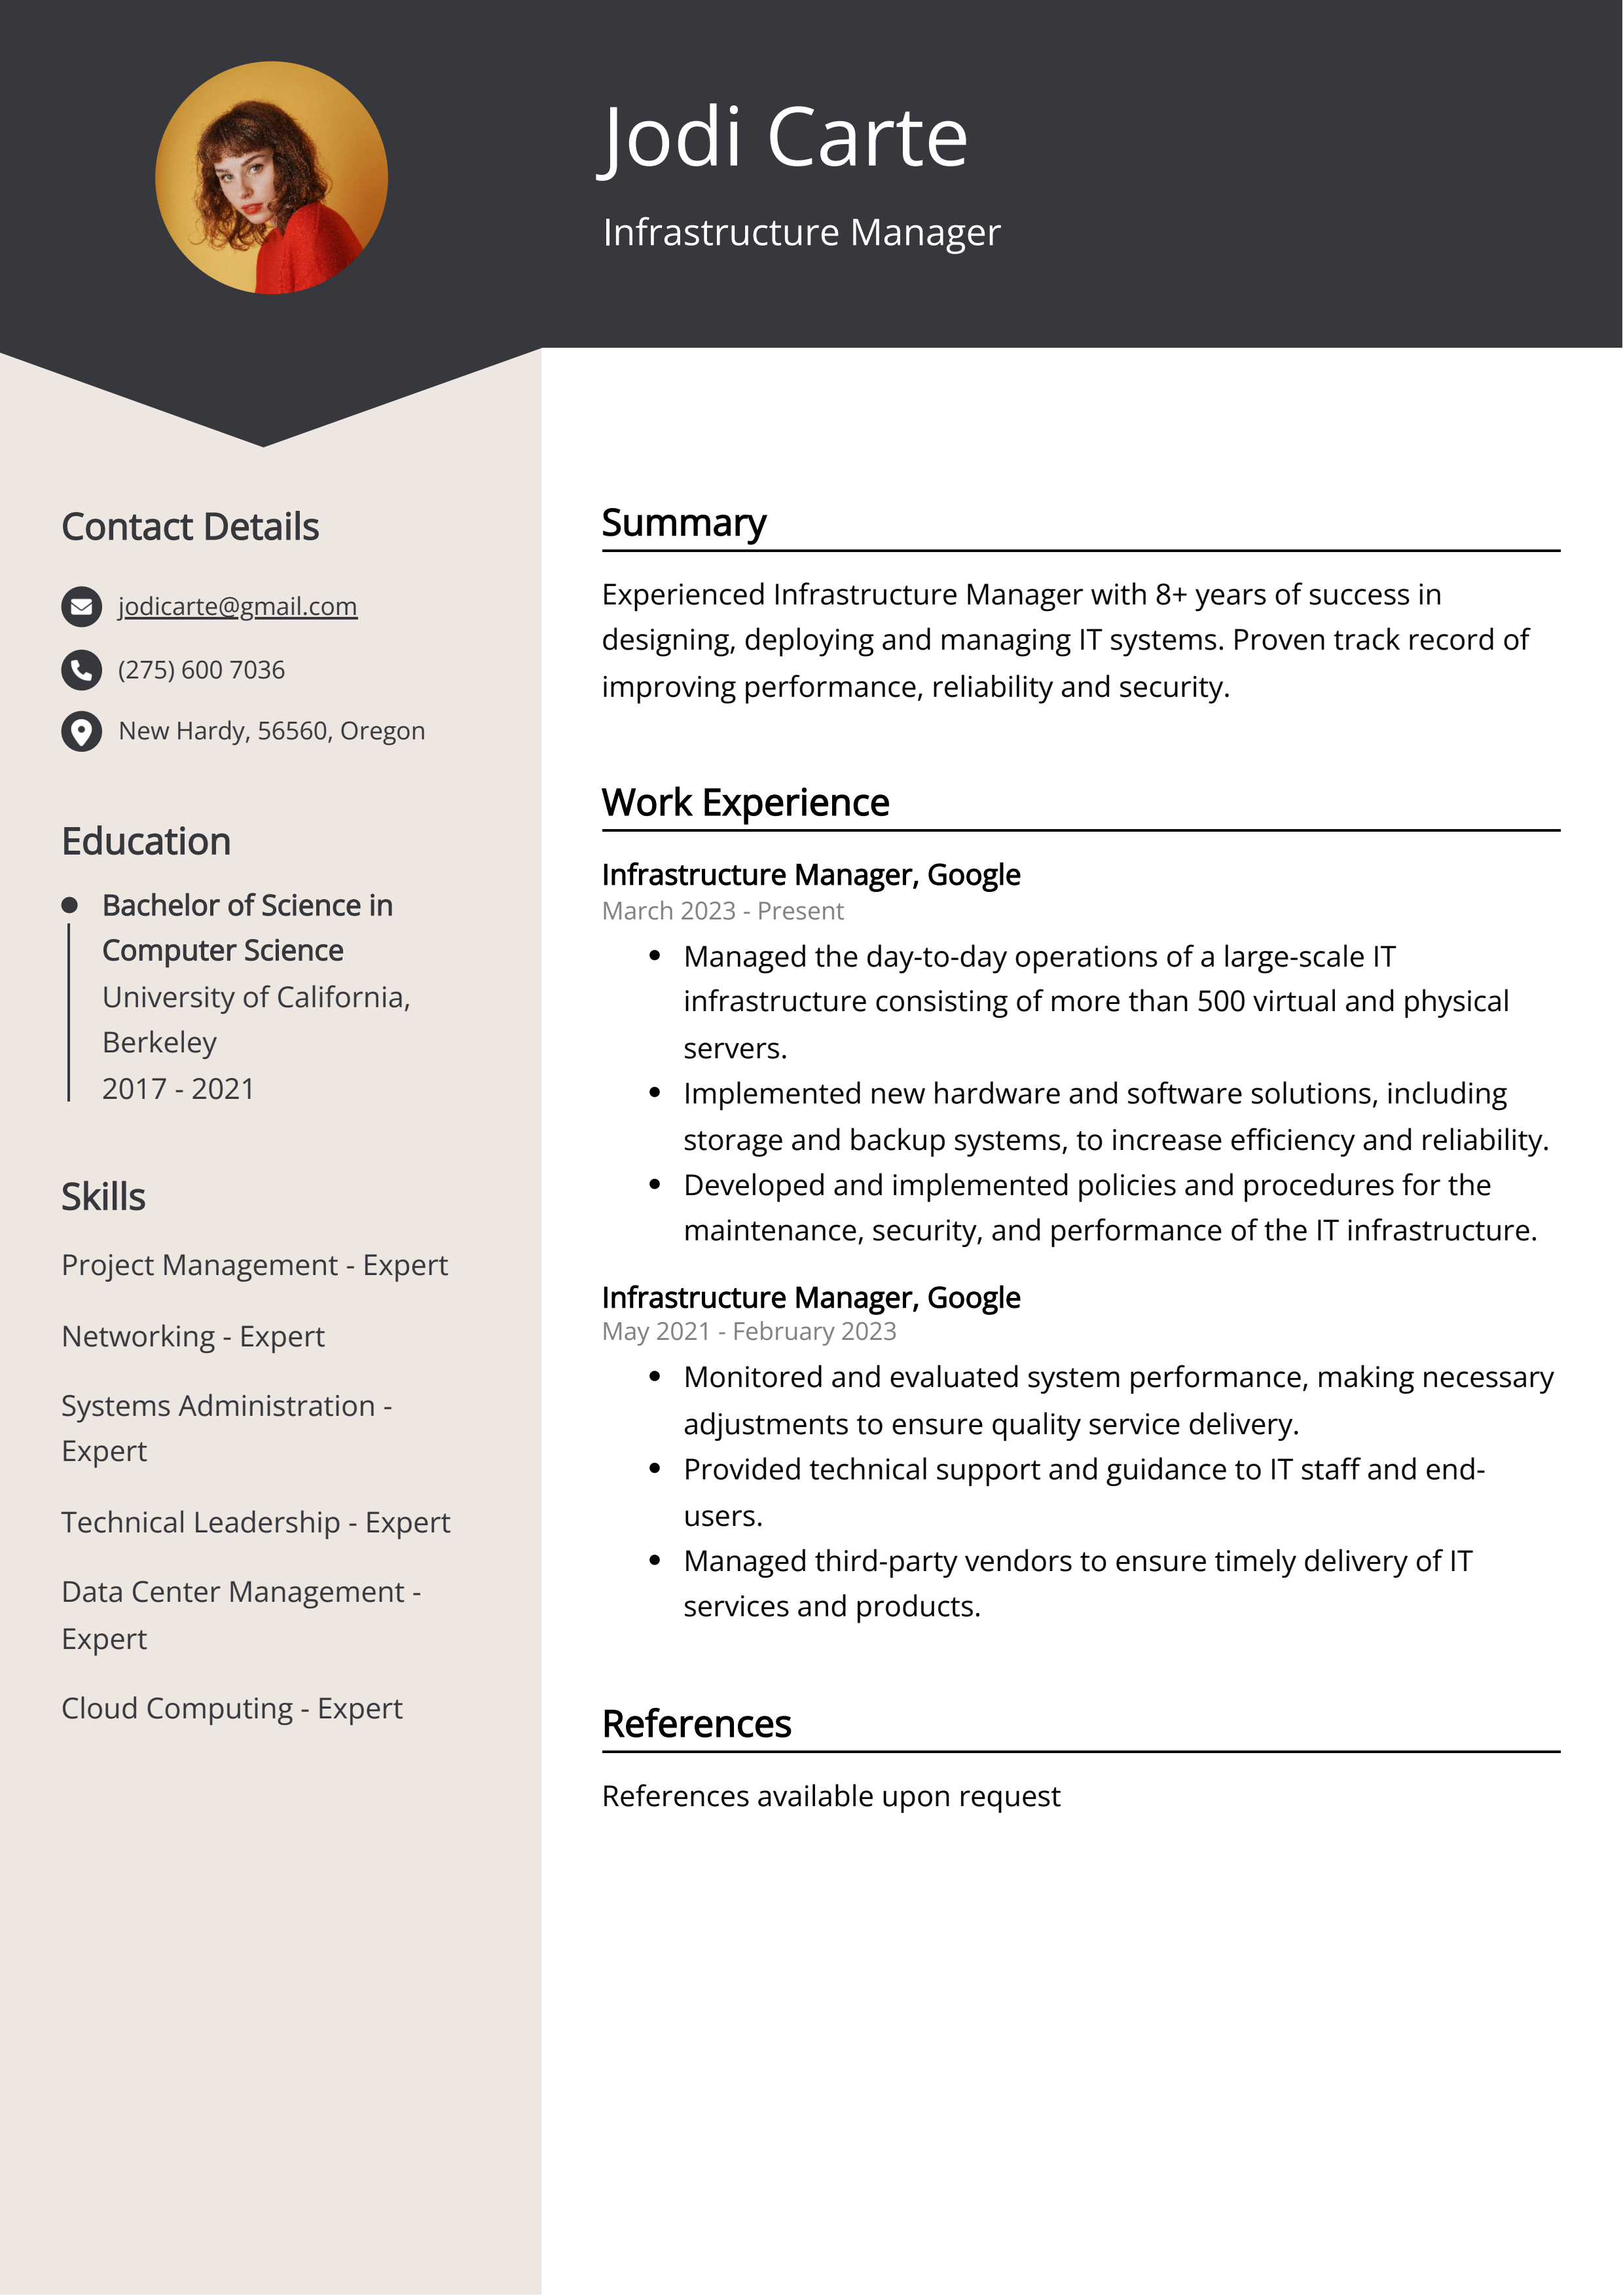 Infrastructure Manager CV Example